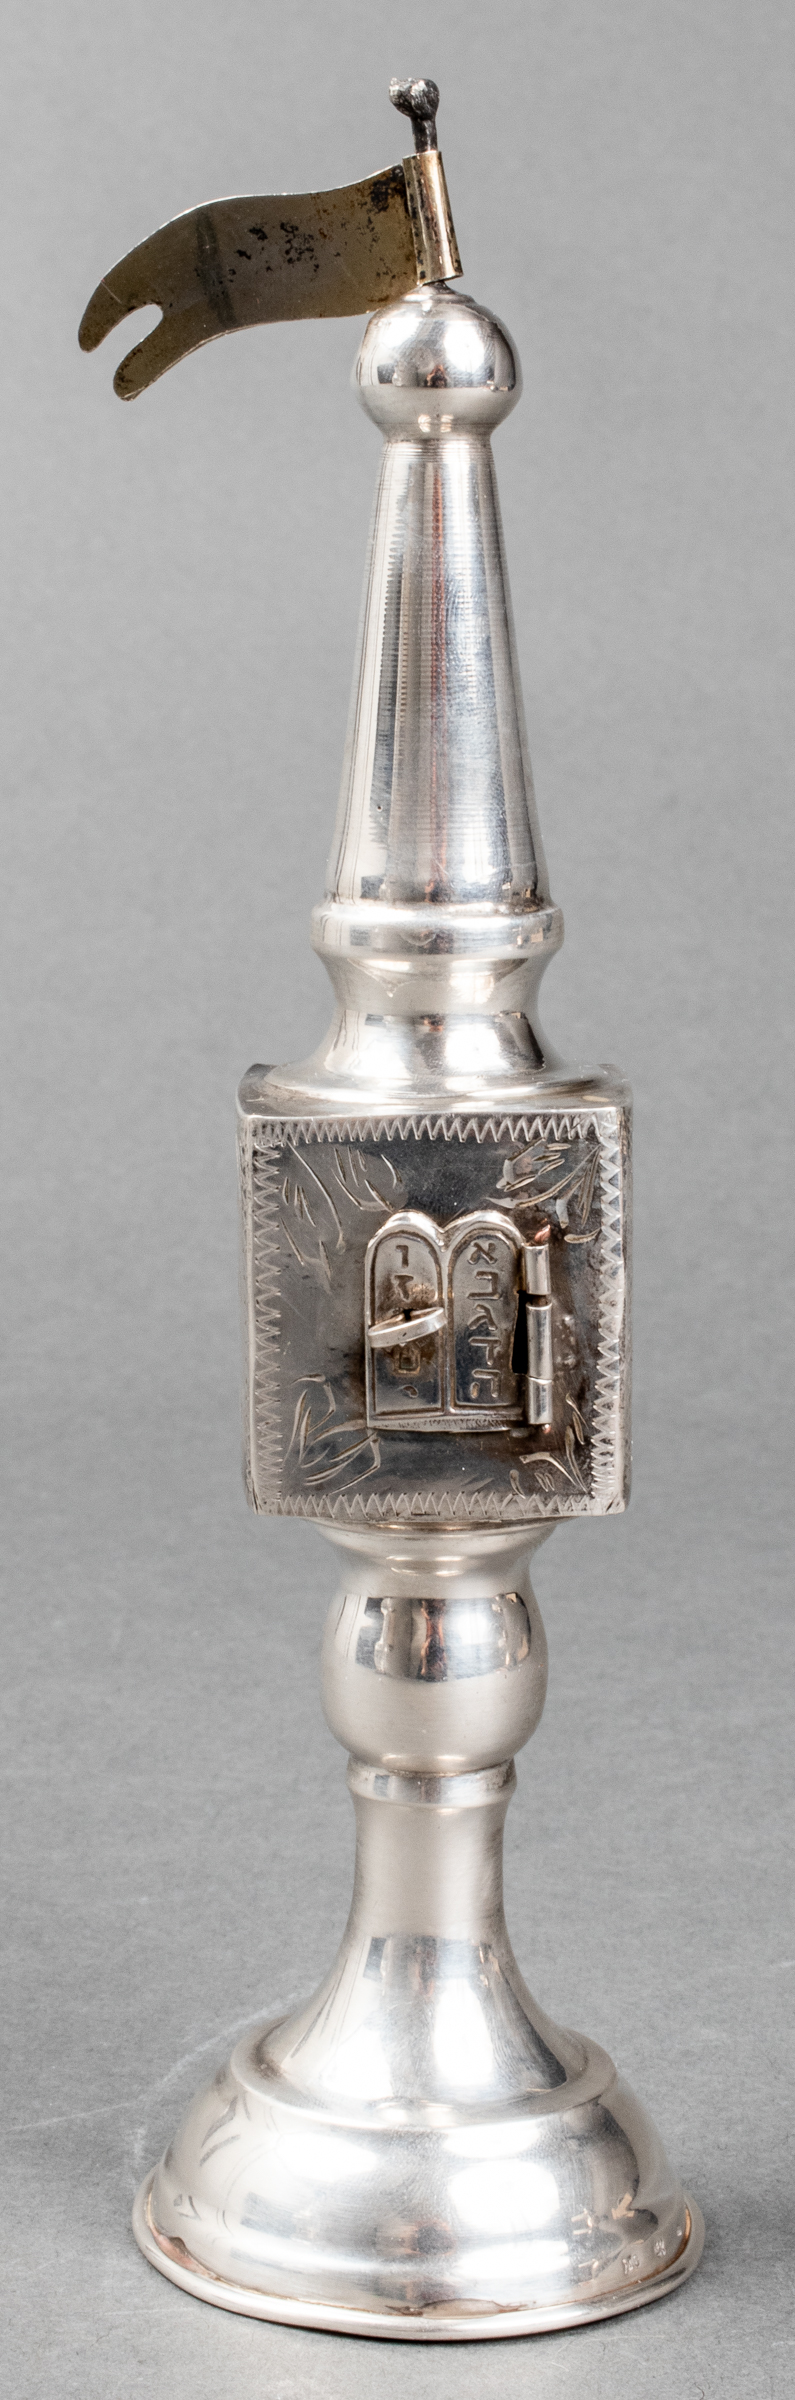 JUDAICA RUSSIAN SILVER SPICE TOWER 3c3992